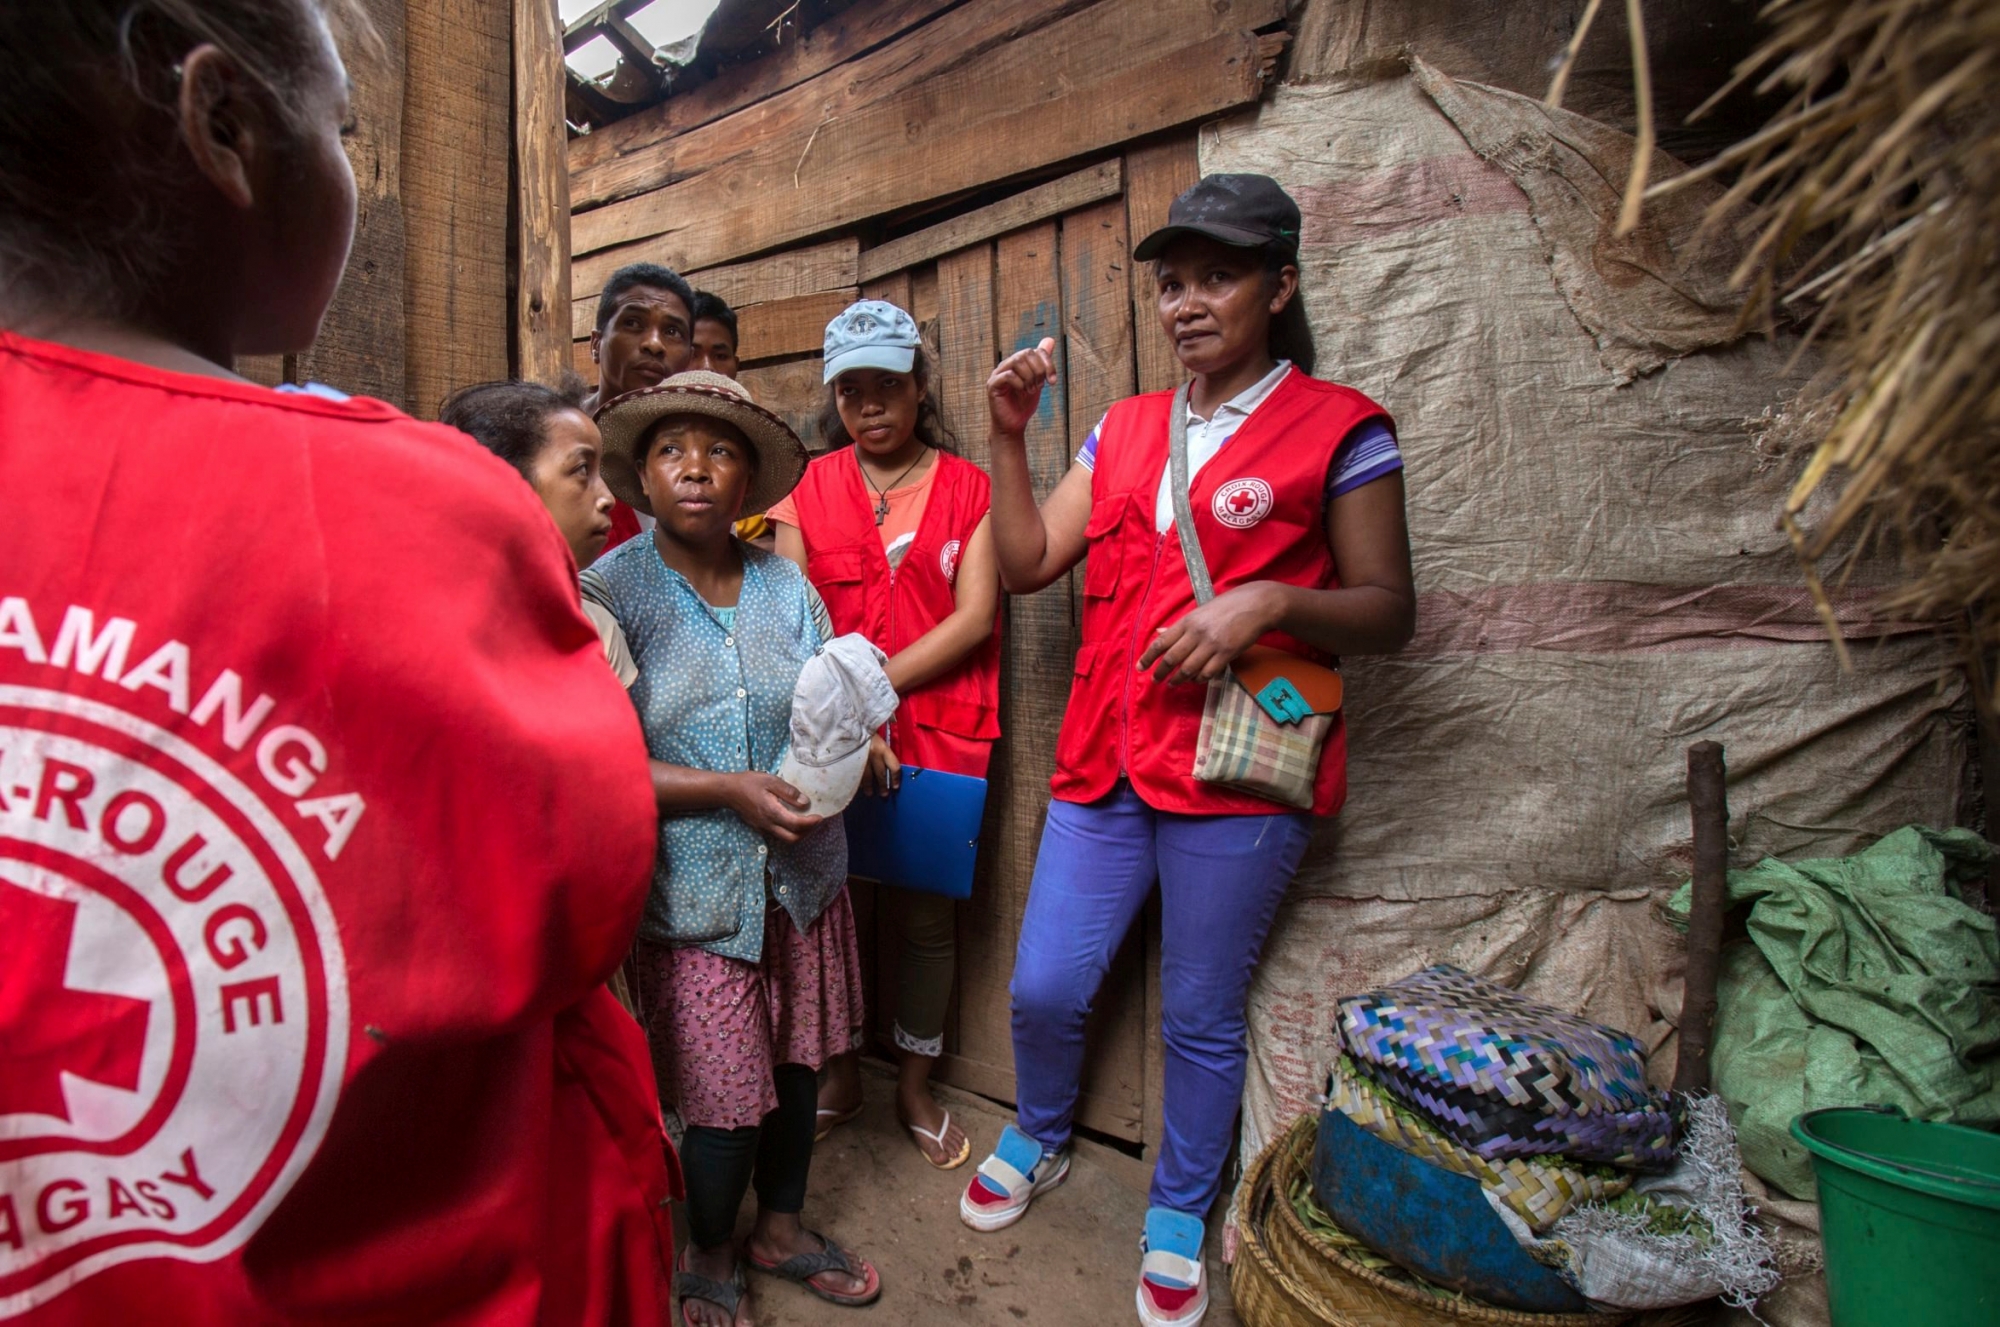 Red Cross volunteers talk to villagers about the plague outbreak, 30 miles west of Antananarivo, Madagascar, Monday, Oct. 16, 2017. As plague cases rose last week in Madagascar's capital, many city dwellers panicked. They waited in long lines for antibiotics at pharmacies and reached through bus windows to buy masks from street vendors. Schools have been canceled, and public gatherings are banned. (AP Photo/Alexander Joe) Madagascar Fighting Plague